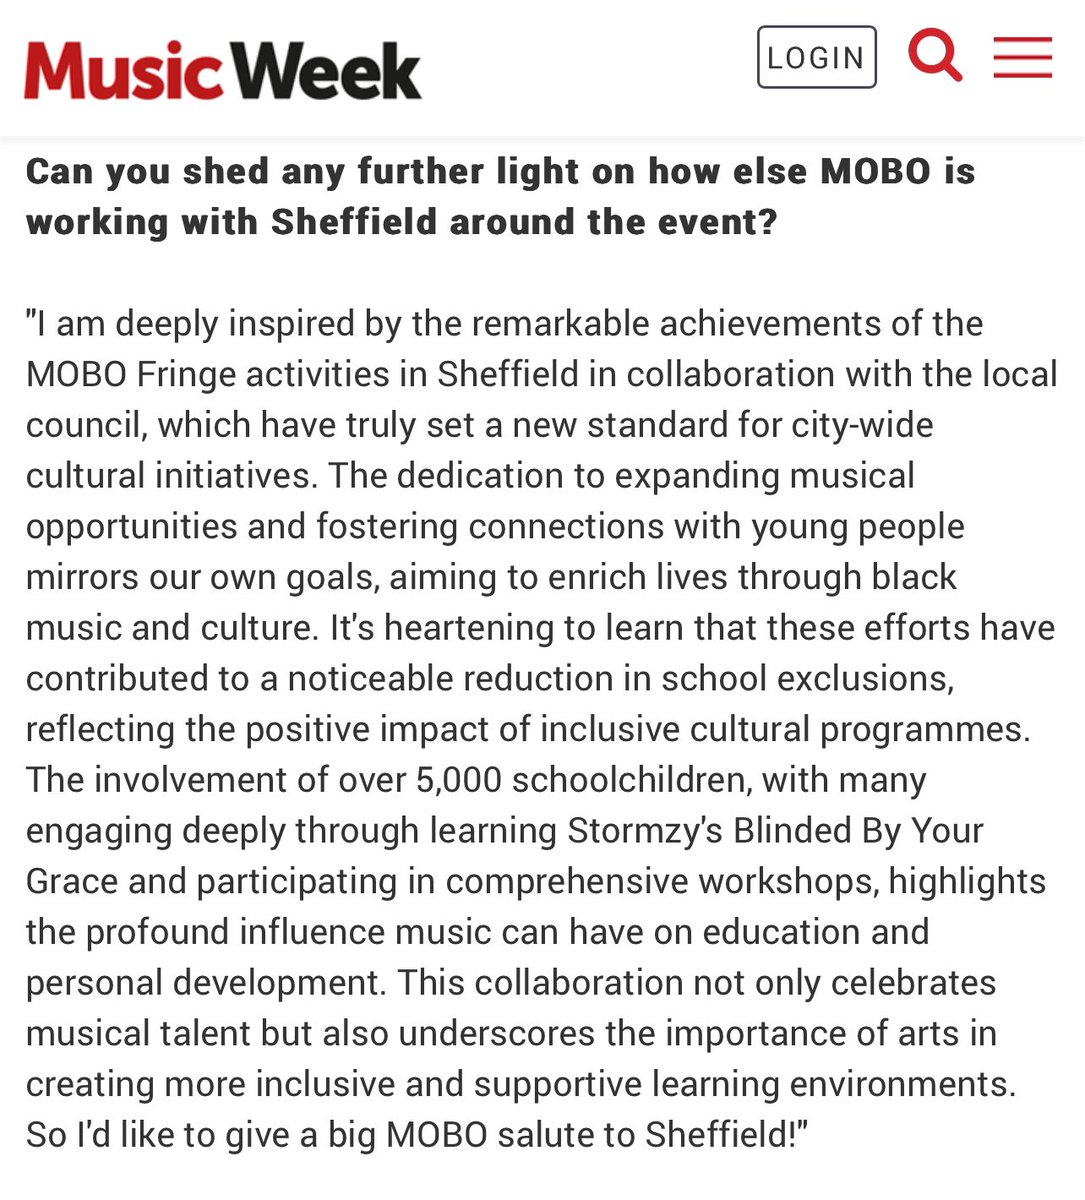 A big #MOBO ‘salute’ to #Sheffield as Host City @MOBOAwards 2024 in @MusicWeek ! So proud of our joint working - Community, Partners and Businesses all across the City. #Sheffield setting the UK standard! 🙌@SheffCouncil @SheffieldArena ⬇️